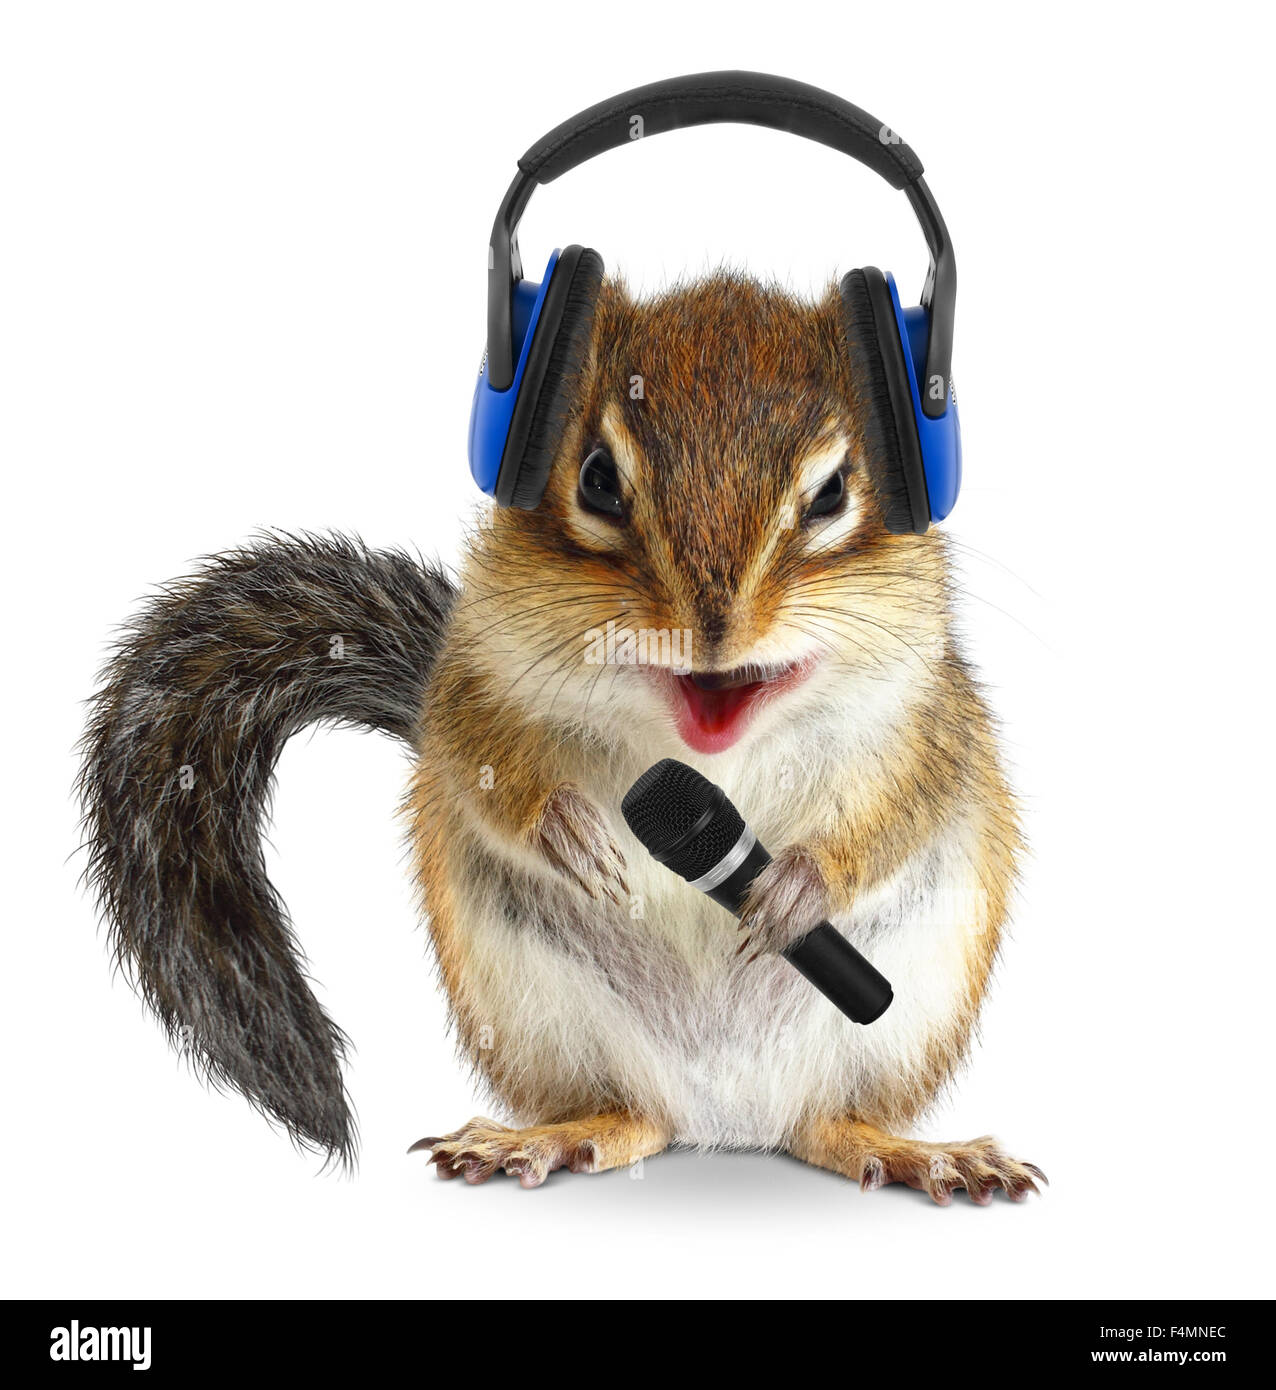 Funny chipmunk dj with headphone and microphone Stock Photo